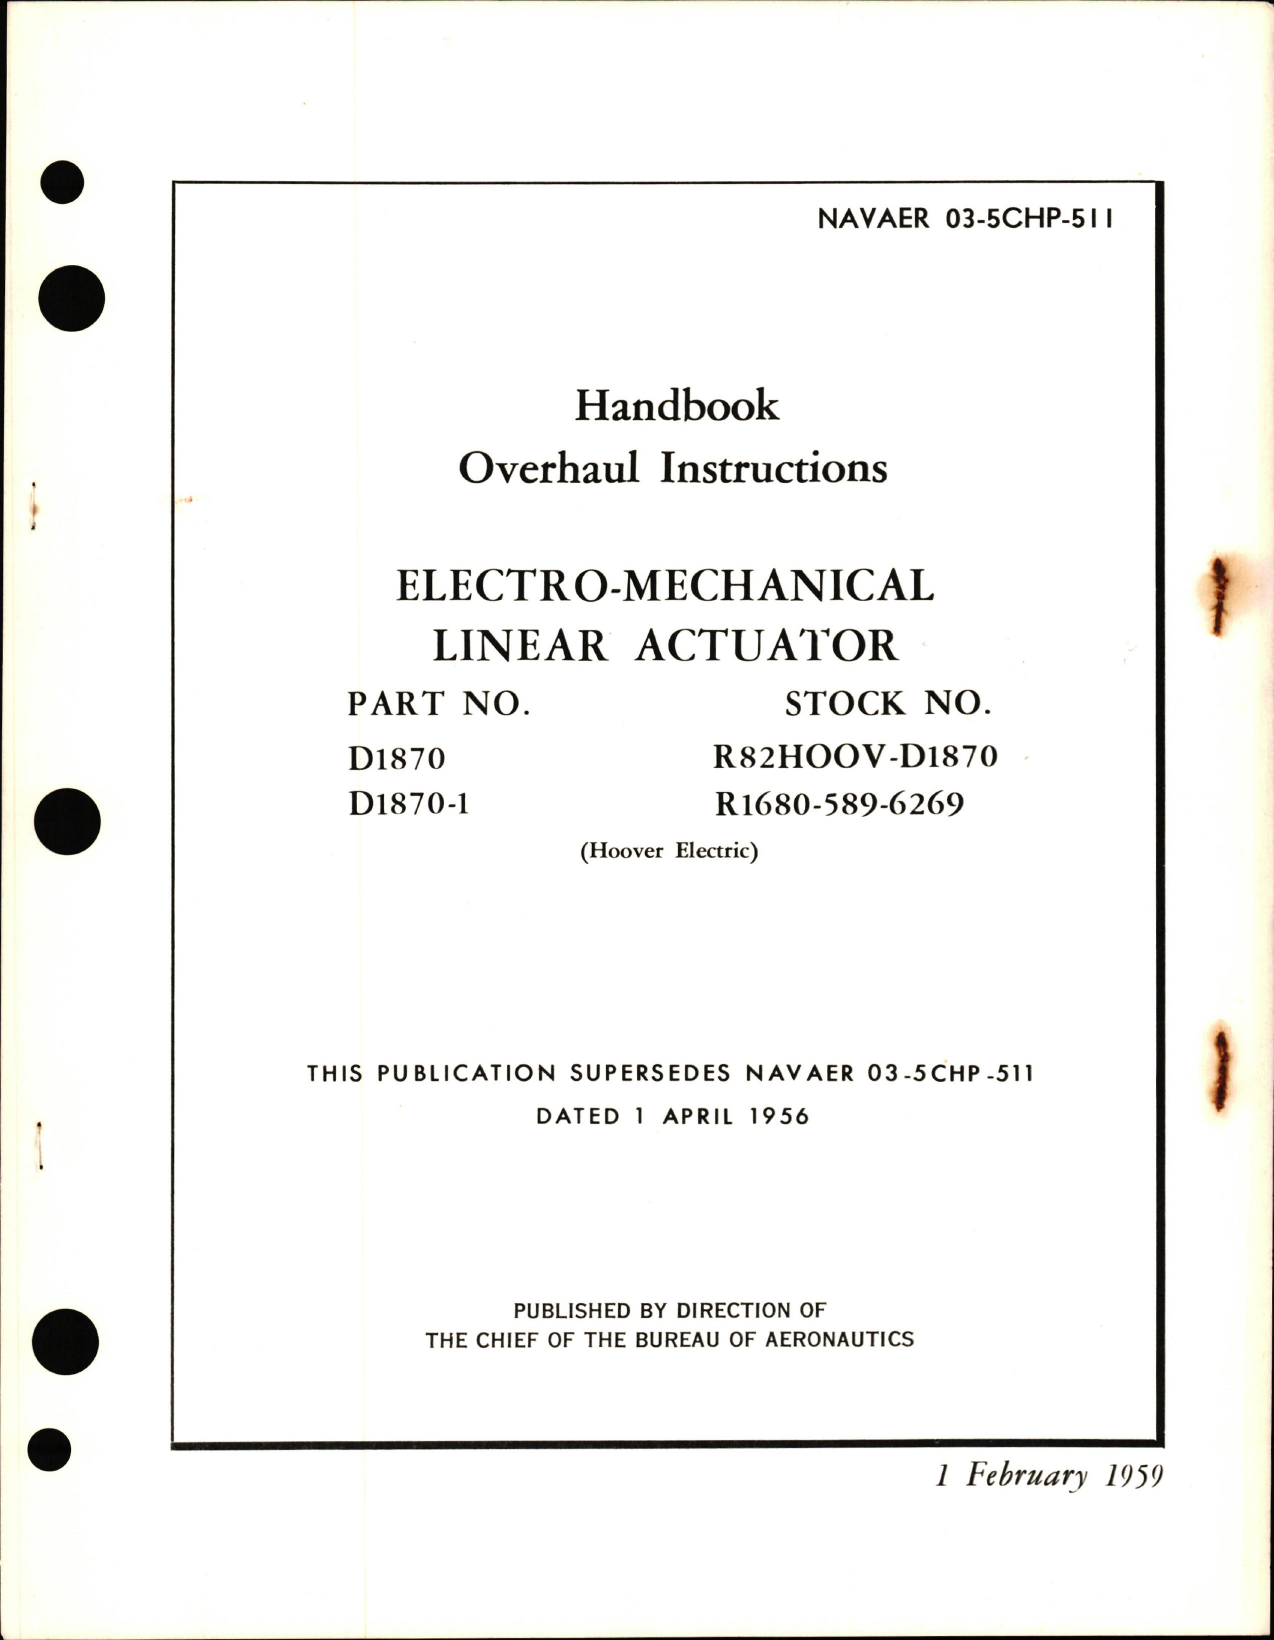 Sample page 1 from AirCorps Library document: Overhaul Instructions for Electro-Mechanical Linear Actuator Parts D1870 and D1870-1